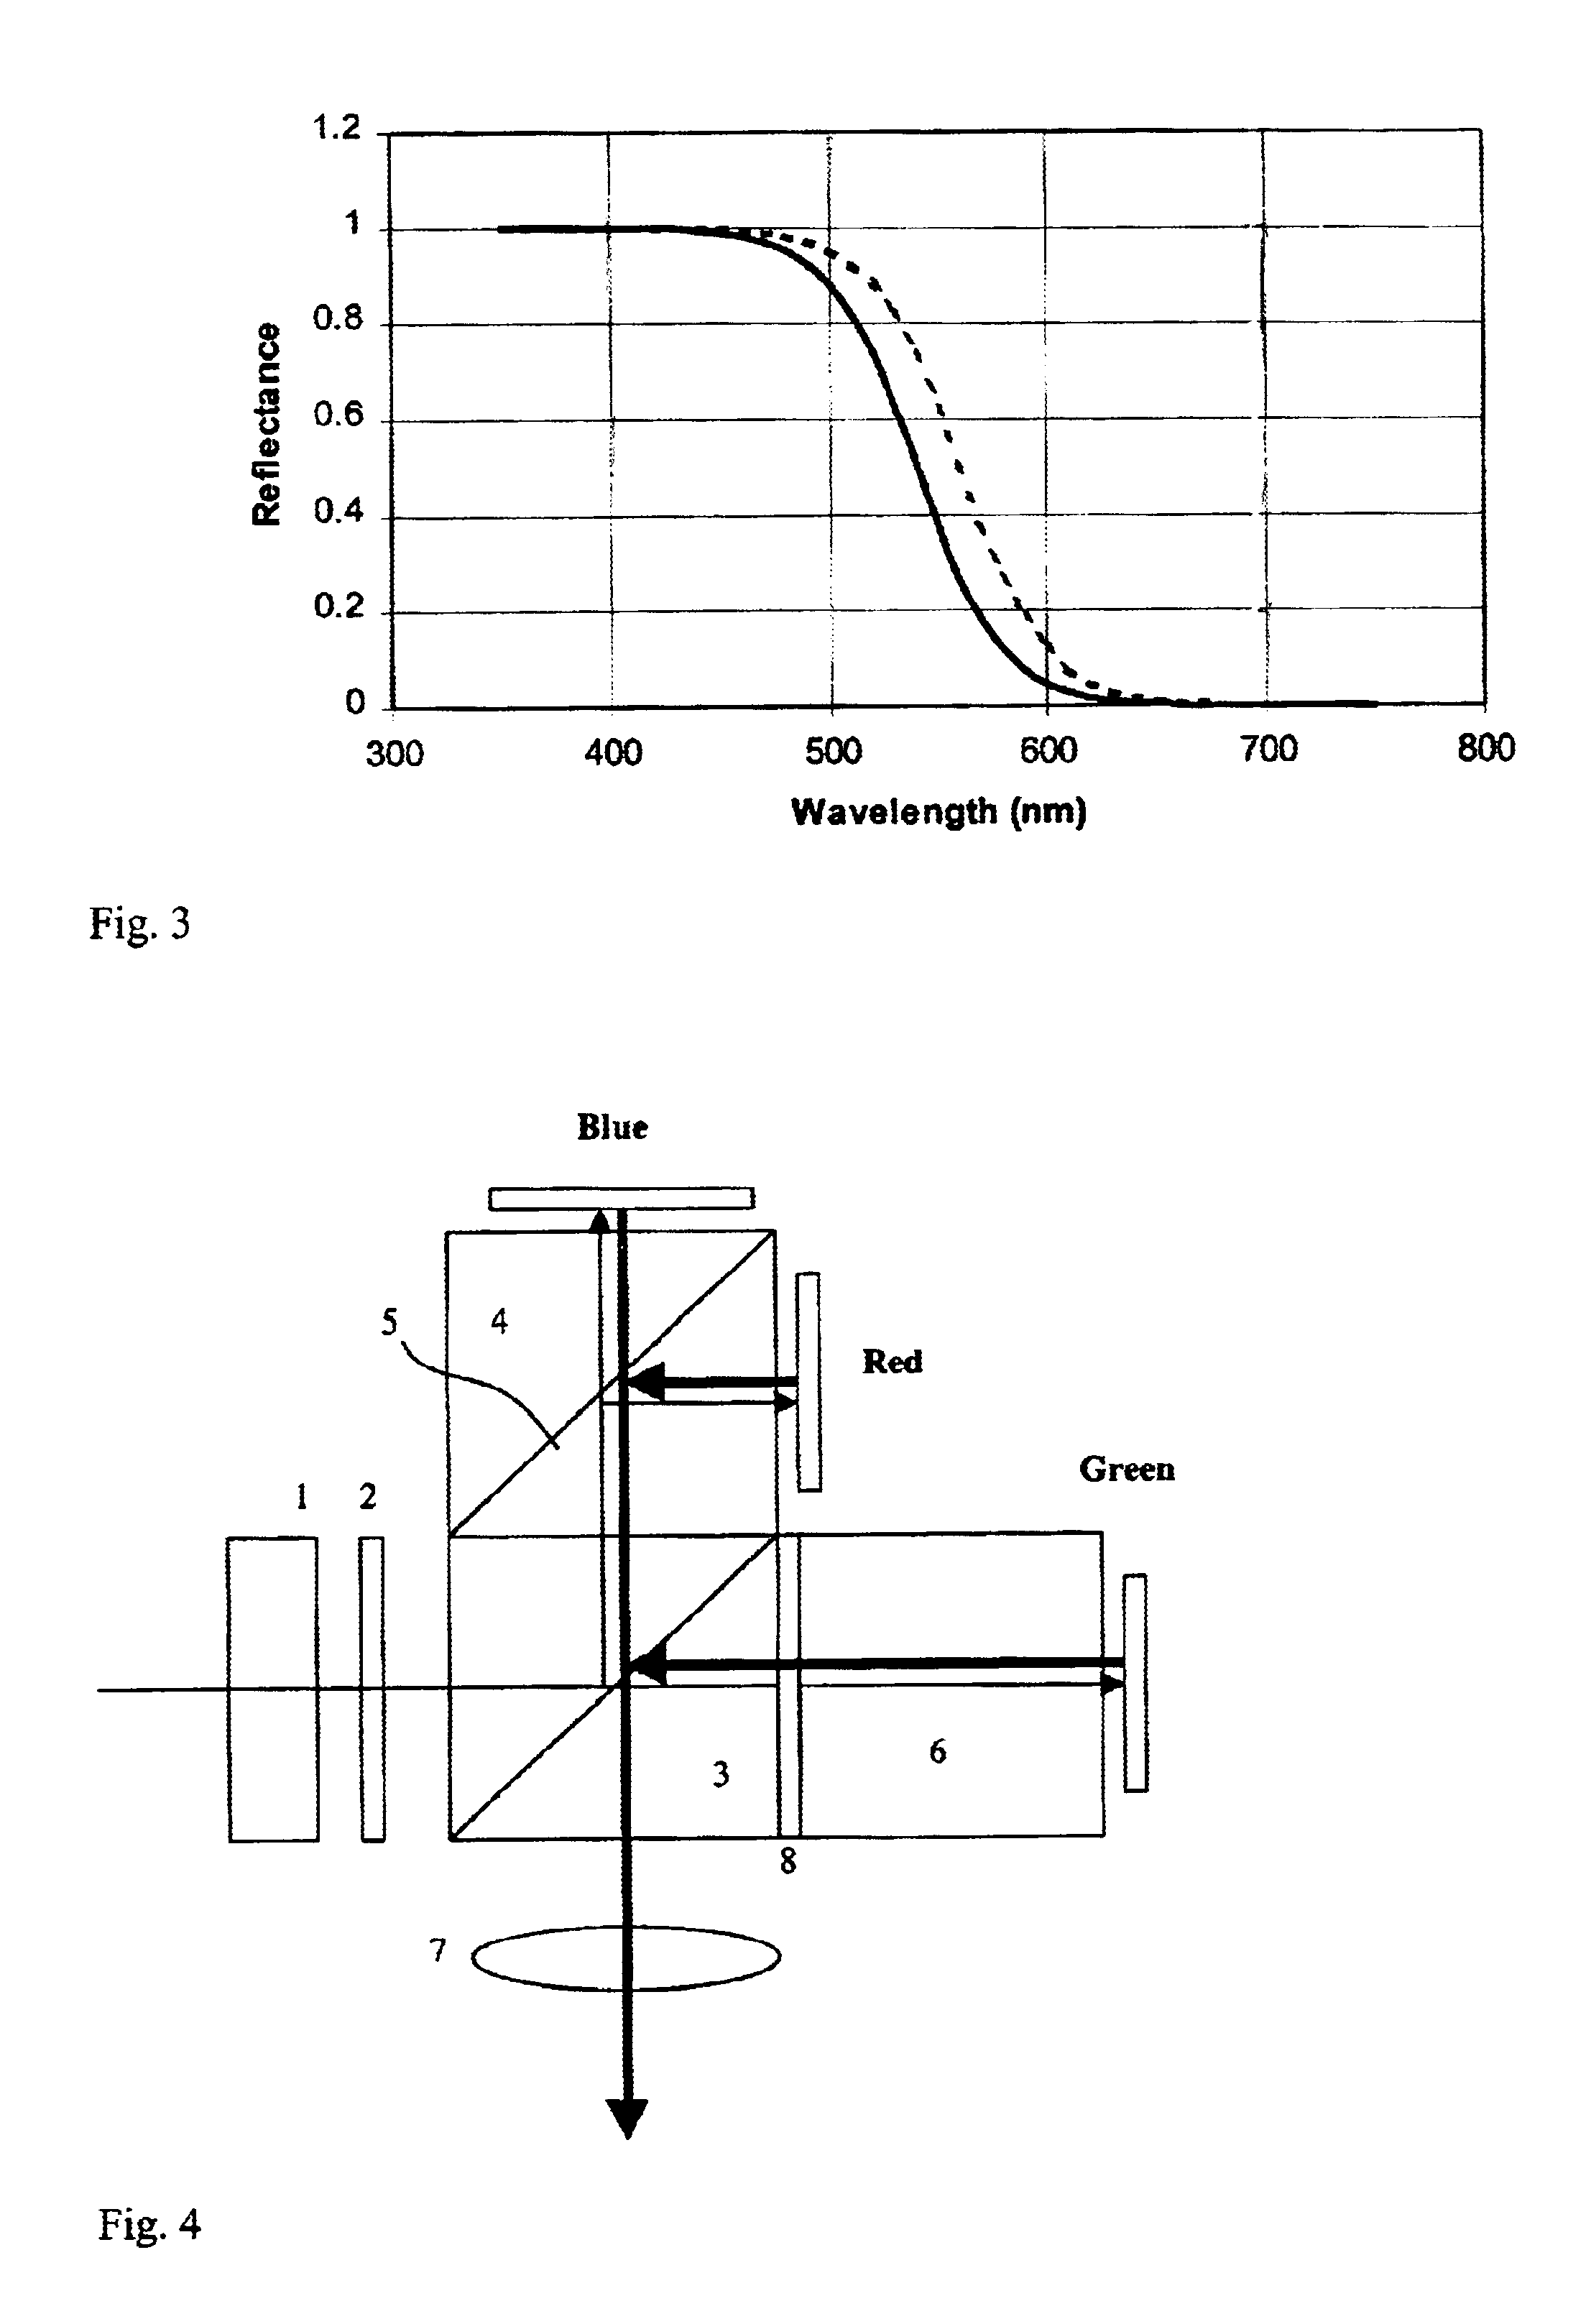 Optical systems for liquid crystal display projectors